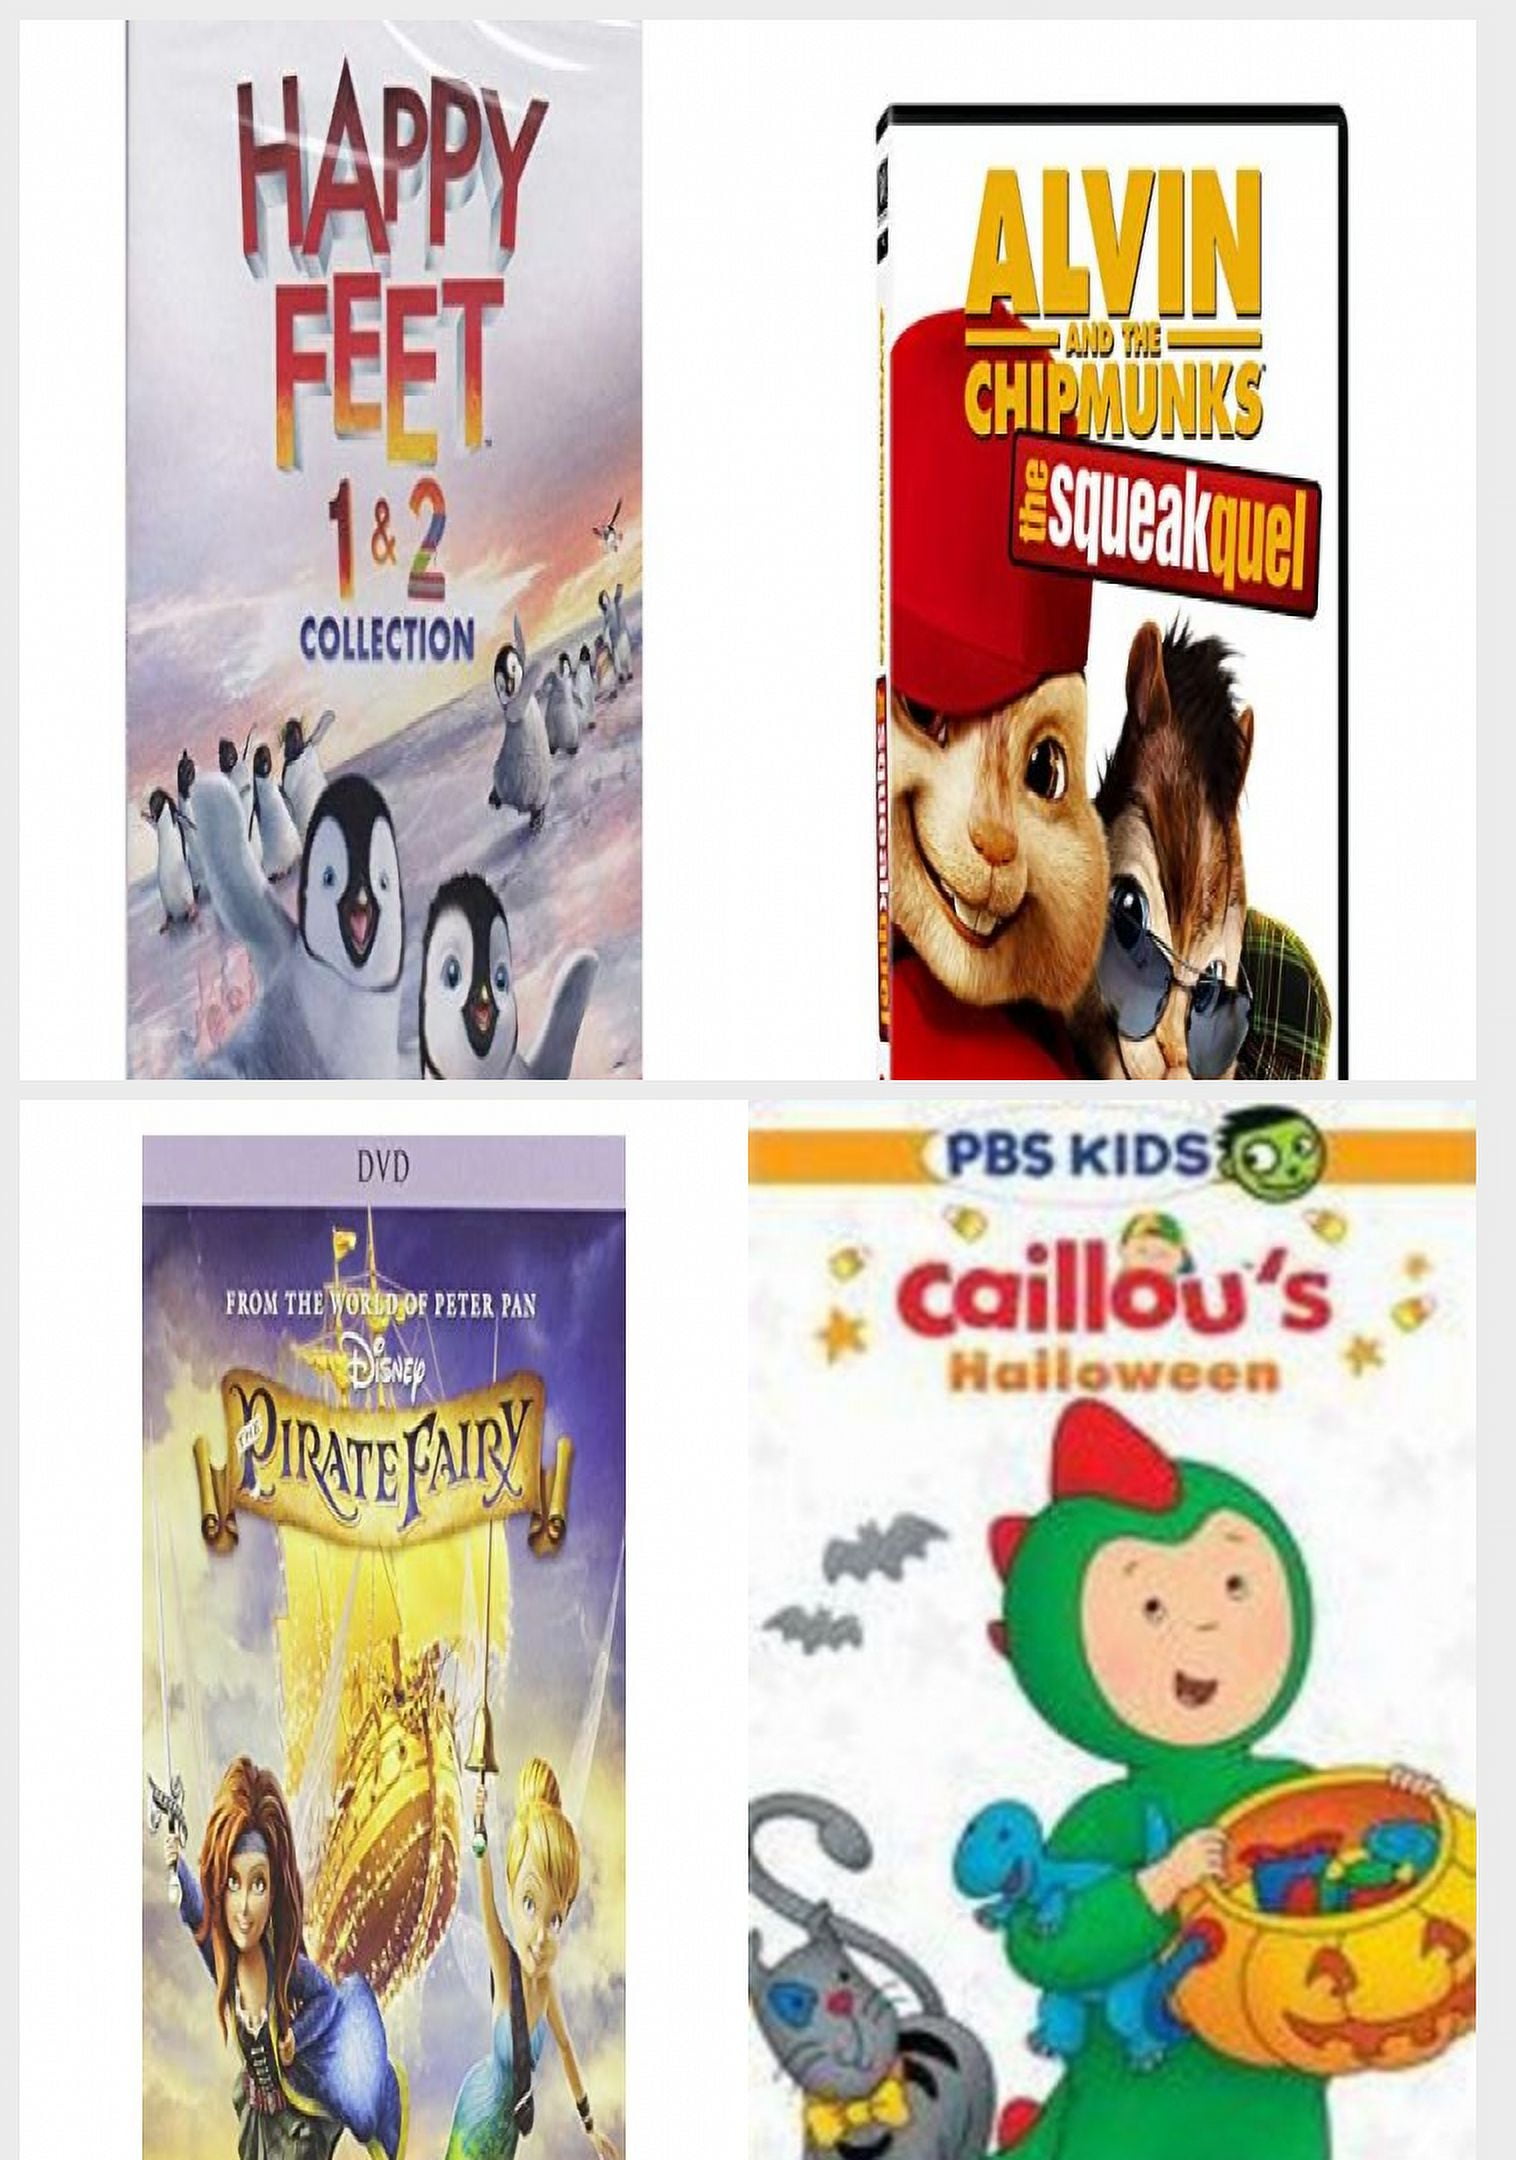 Children's 4 Pack DVD Bundle: Happy Feet 1 & 2, Alvin and the Chipmunks:  The Squeakquel Single-Disc Edition, The Pirate Fairy, Caillou: Caillou's